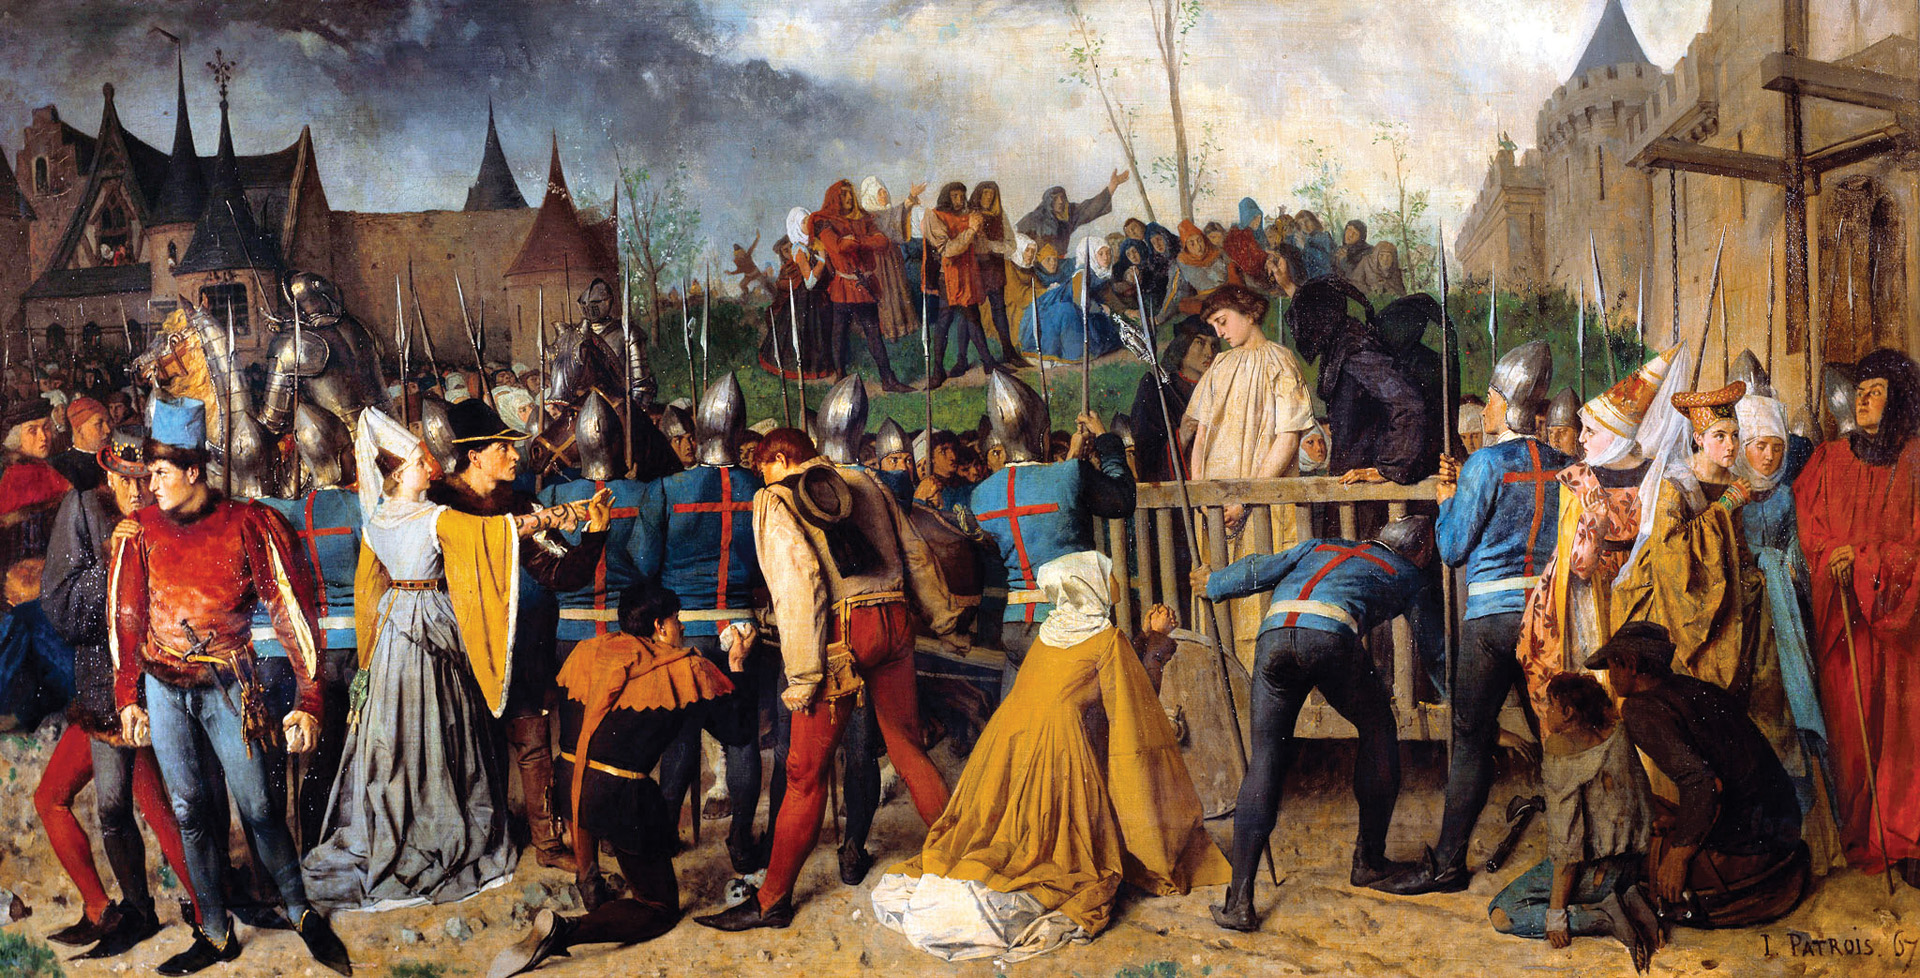 Nineteen-year-old Joan was burned at the stake in 1431. She immediately became a national hero to the French.